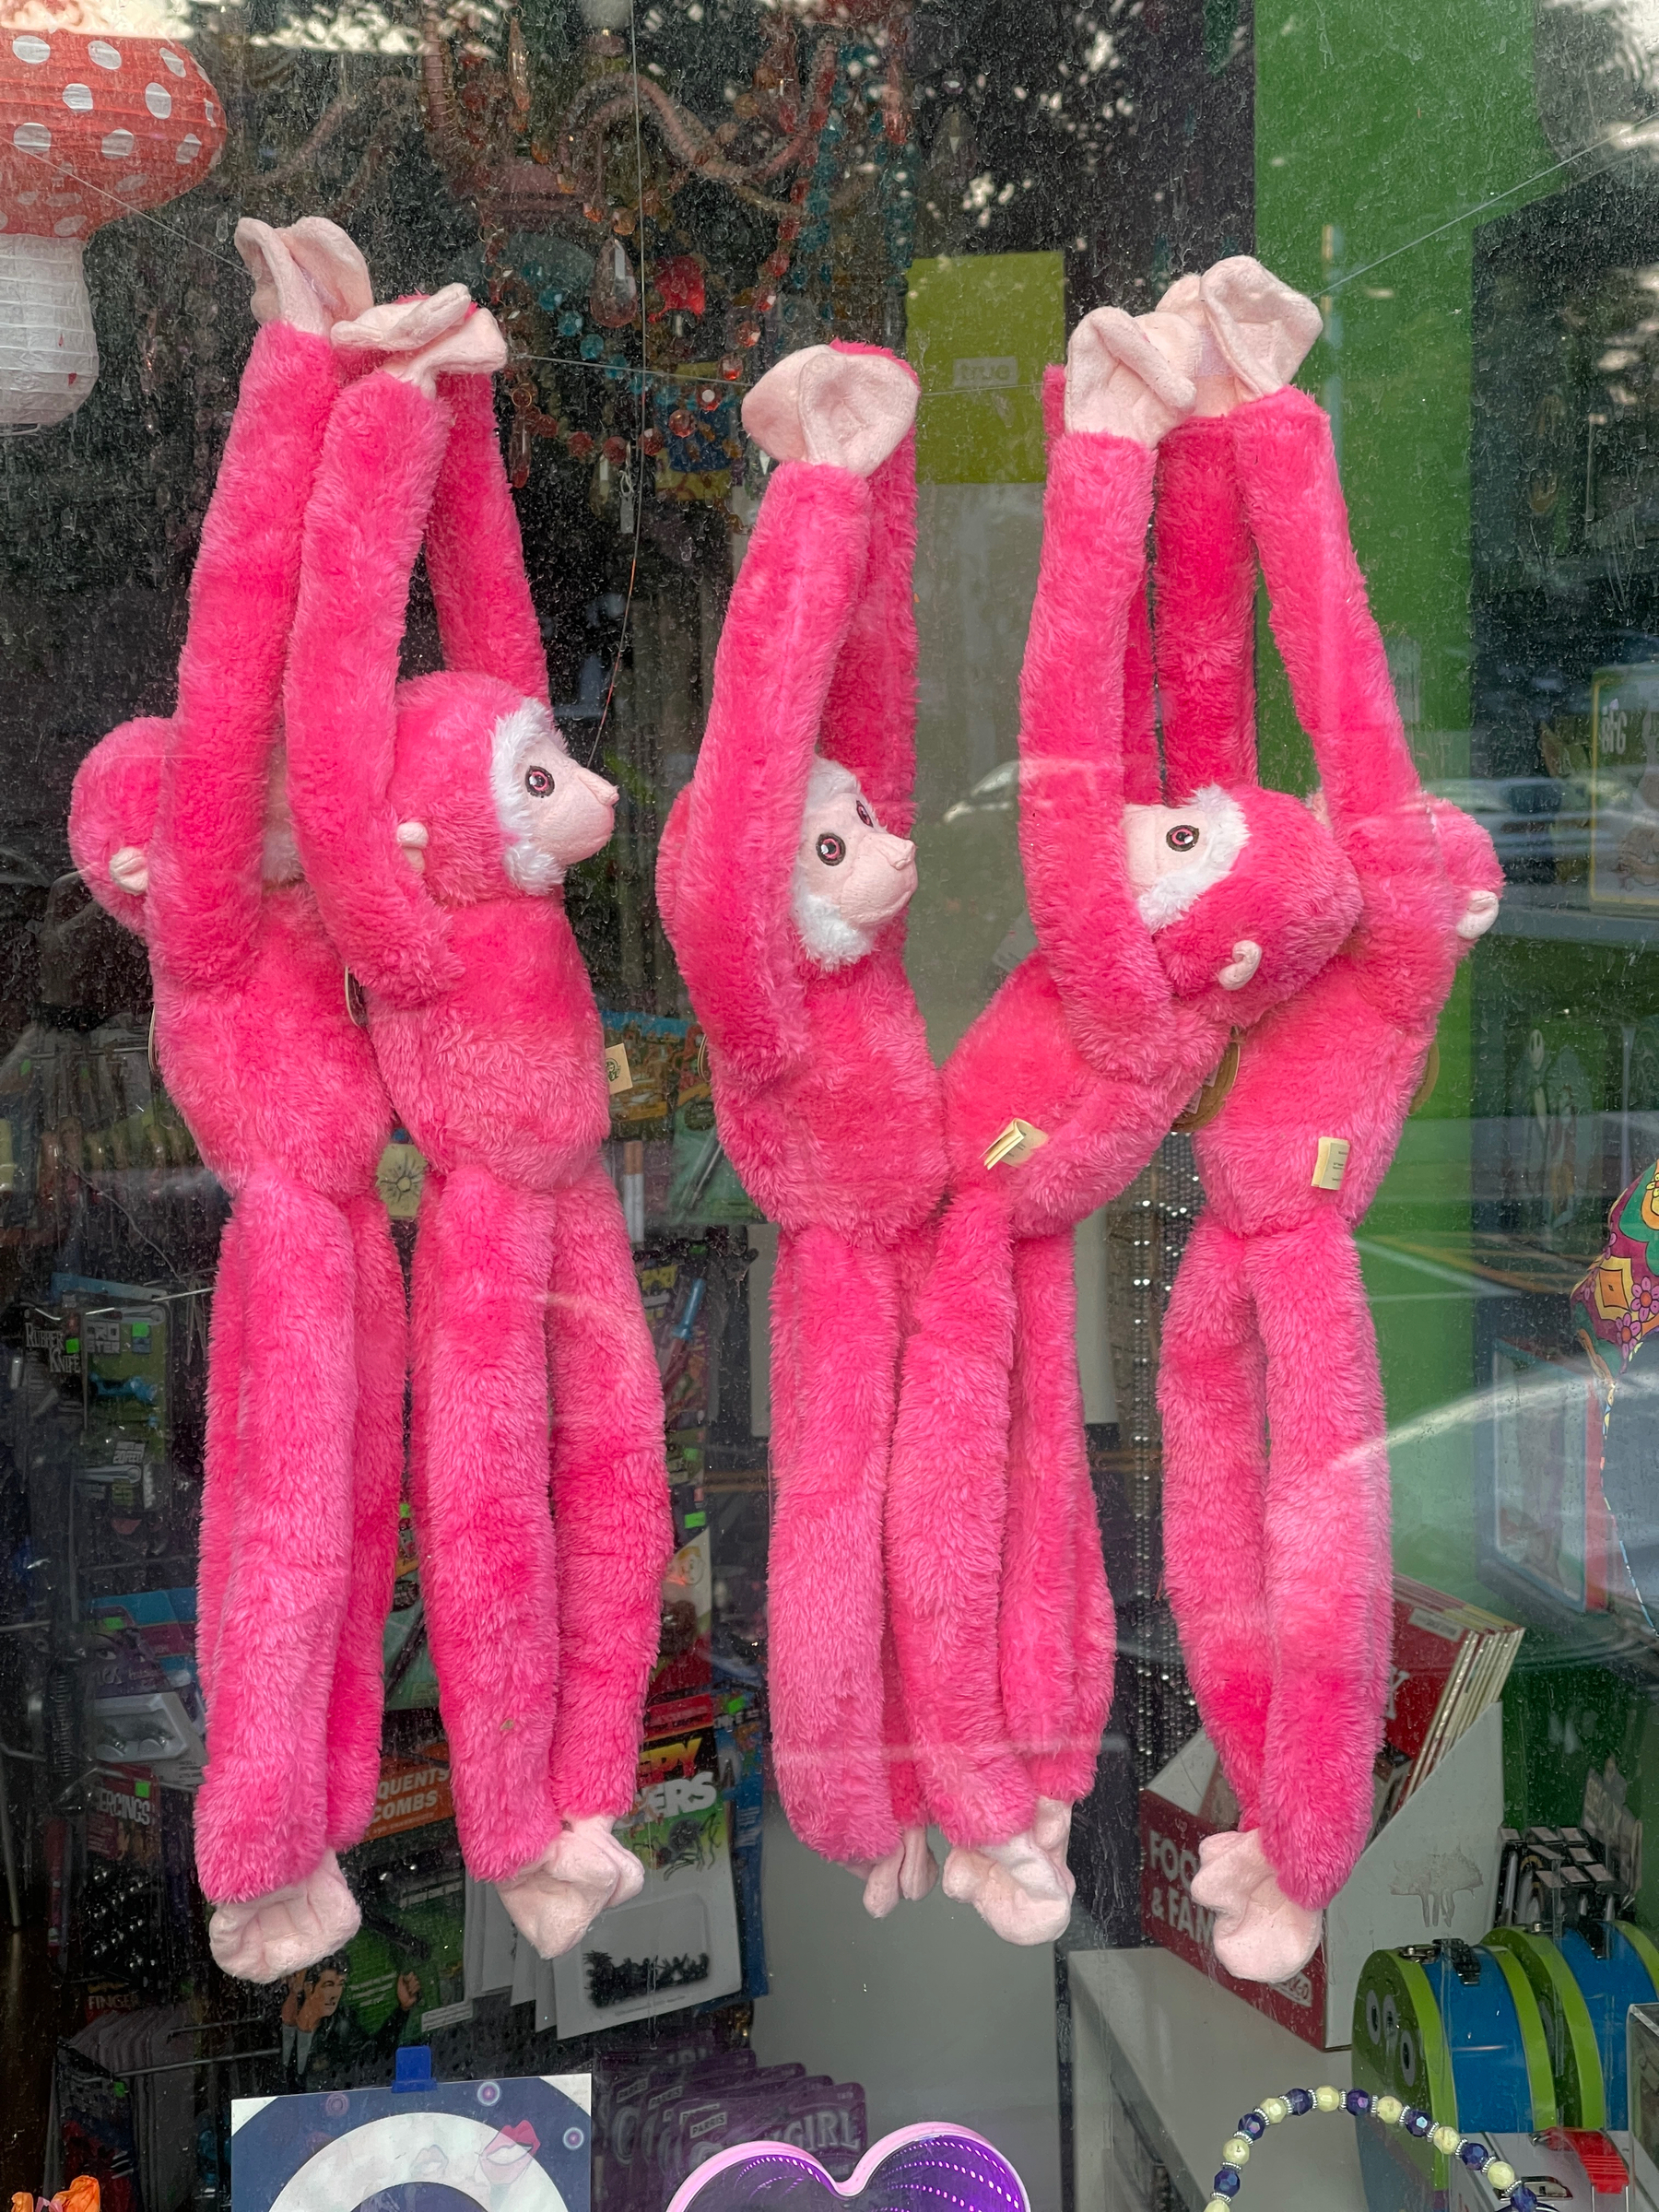 Five pink stuffed monkey dolls hanging by their wrists in a shop window.